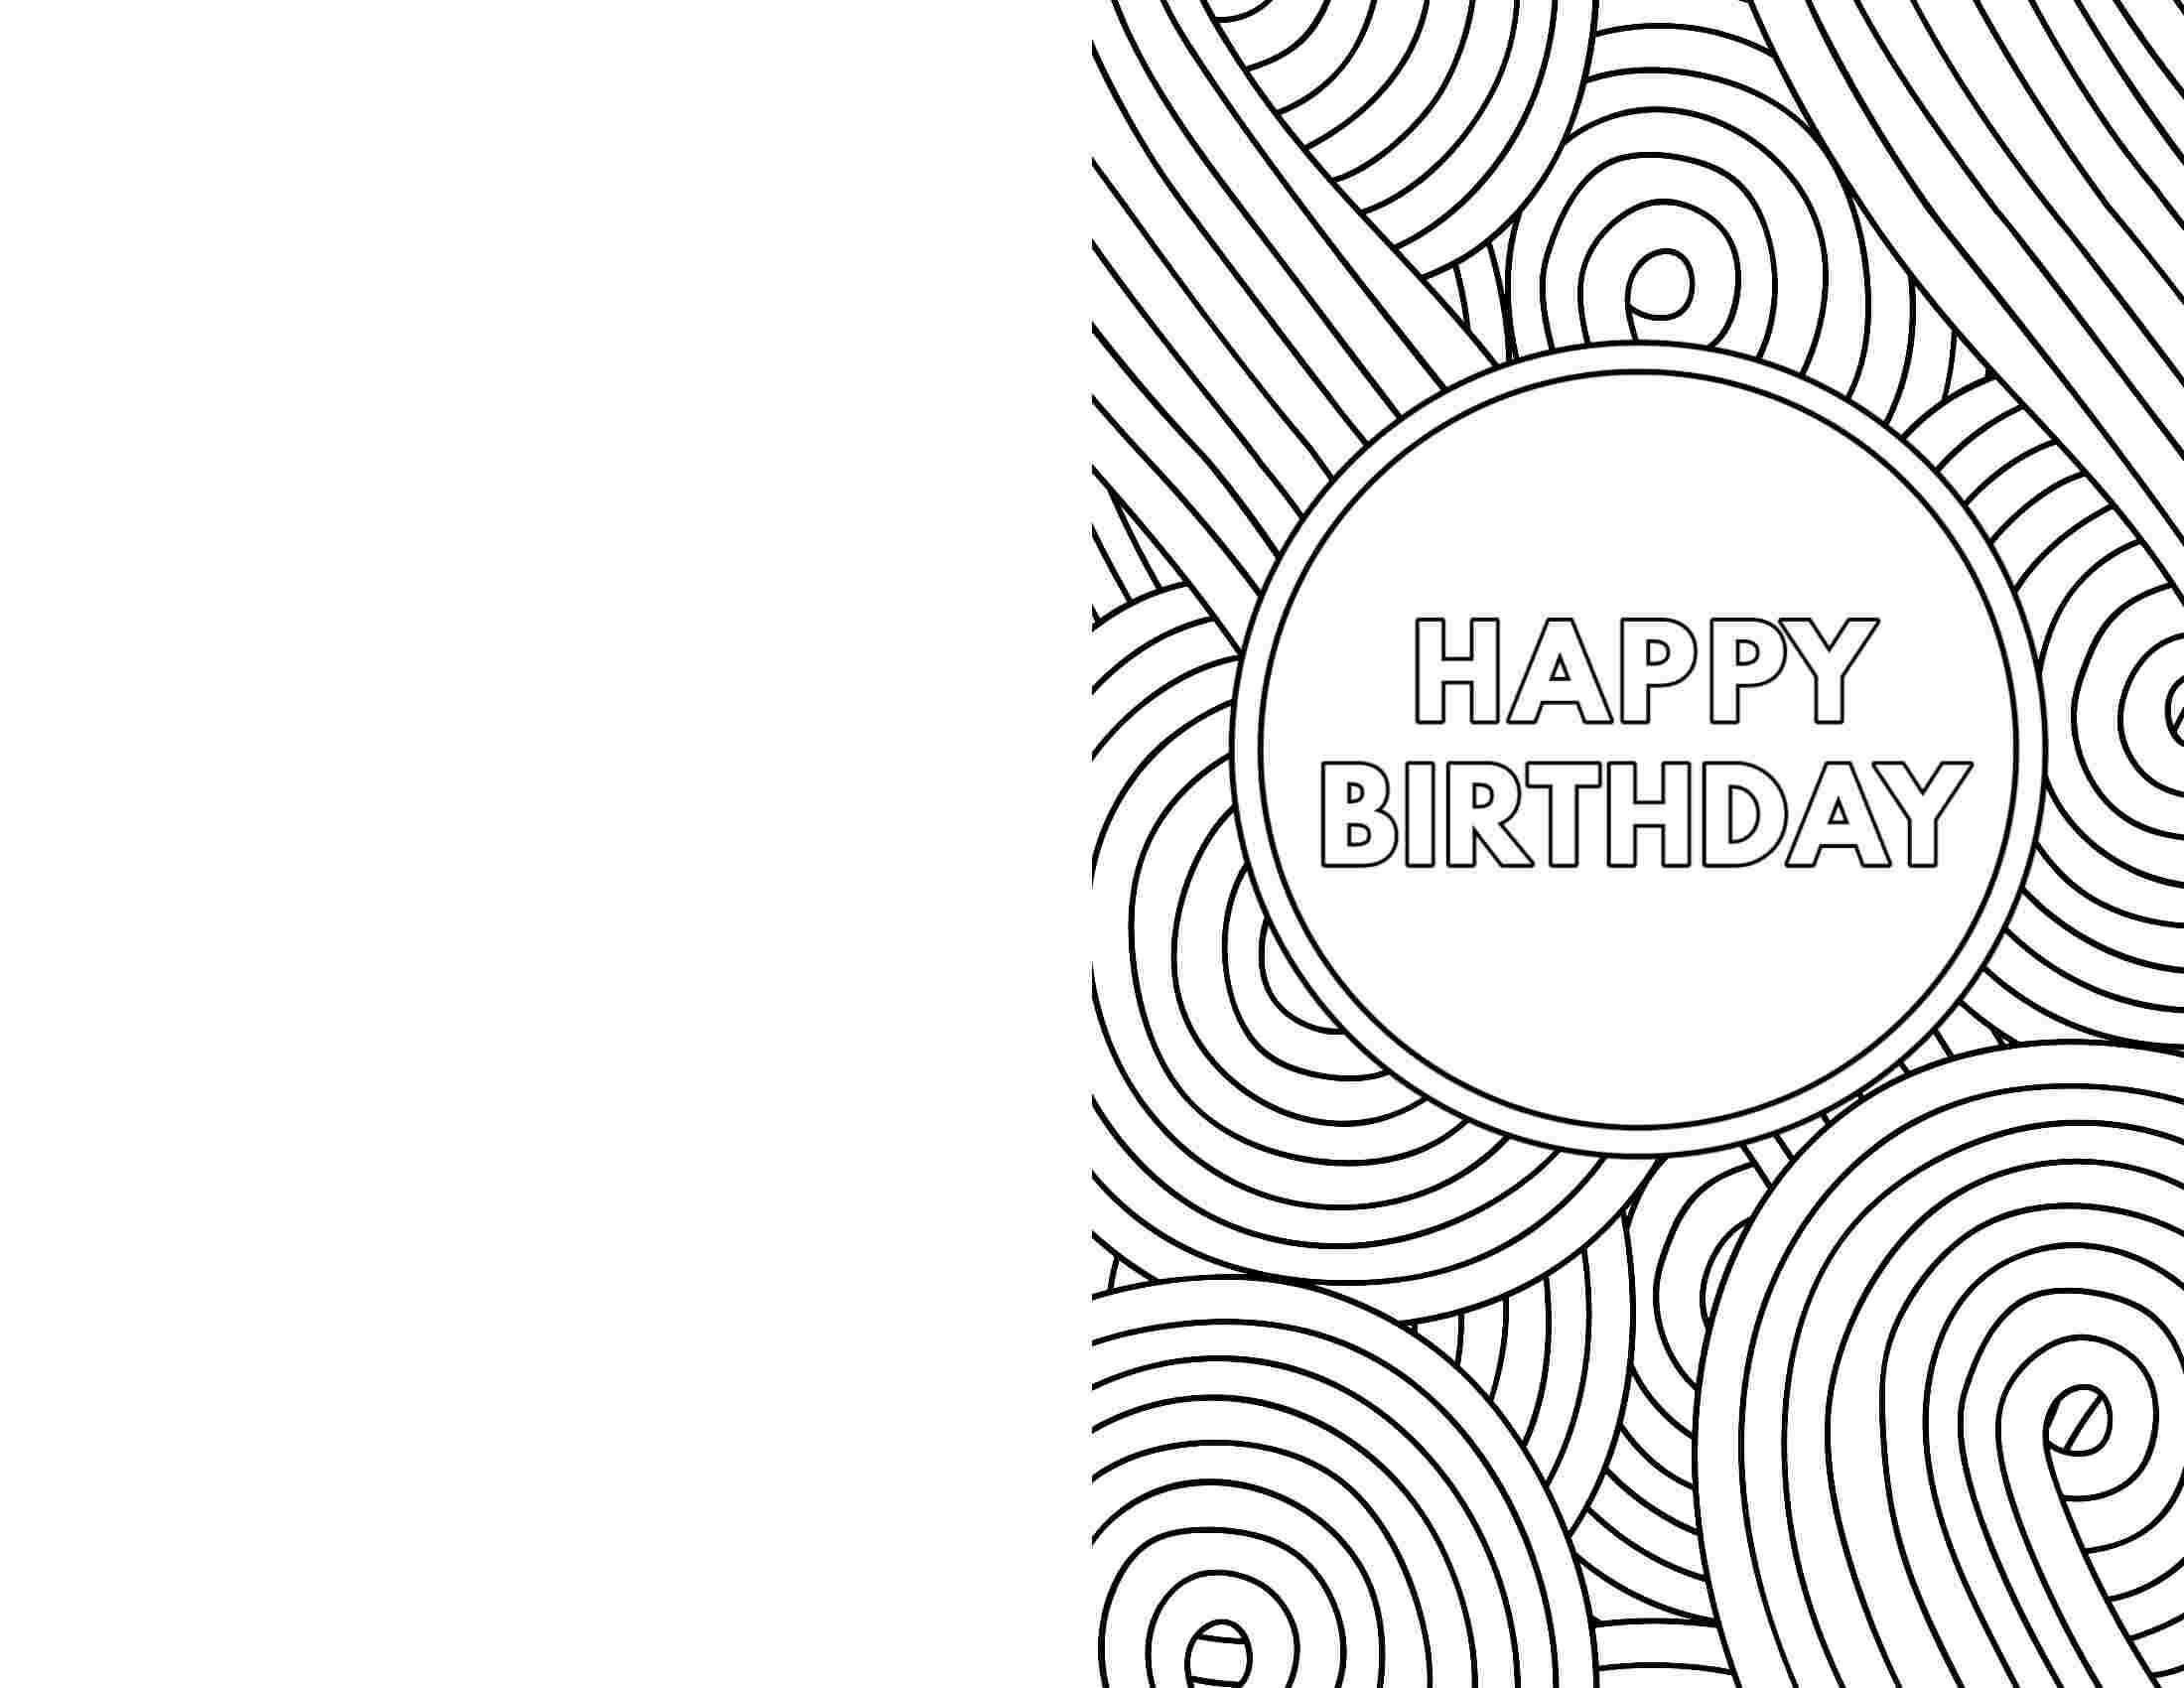 Coloring : Printable Coloring Birthday Cards Happy Colouring With Mom Birthday Card Template